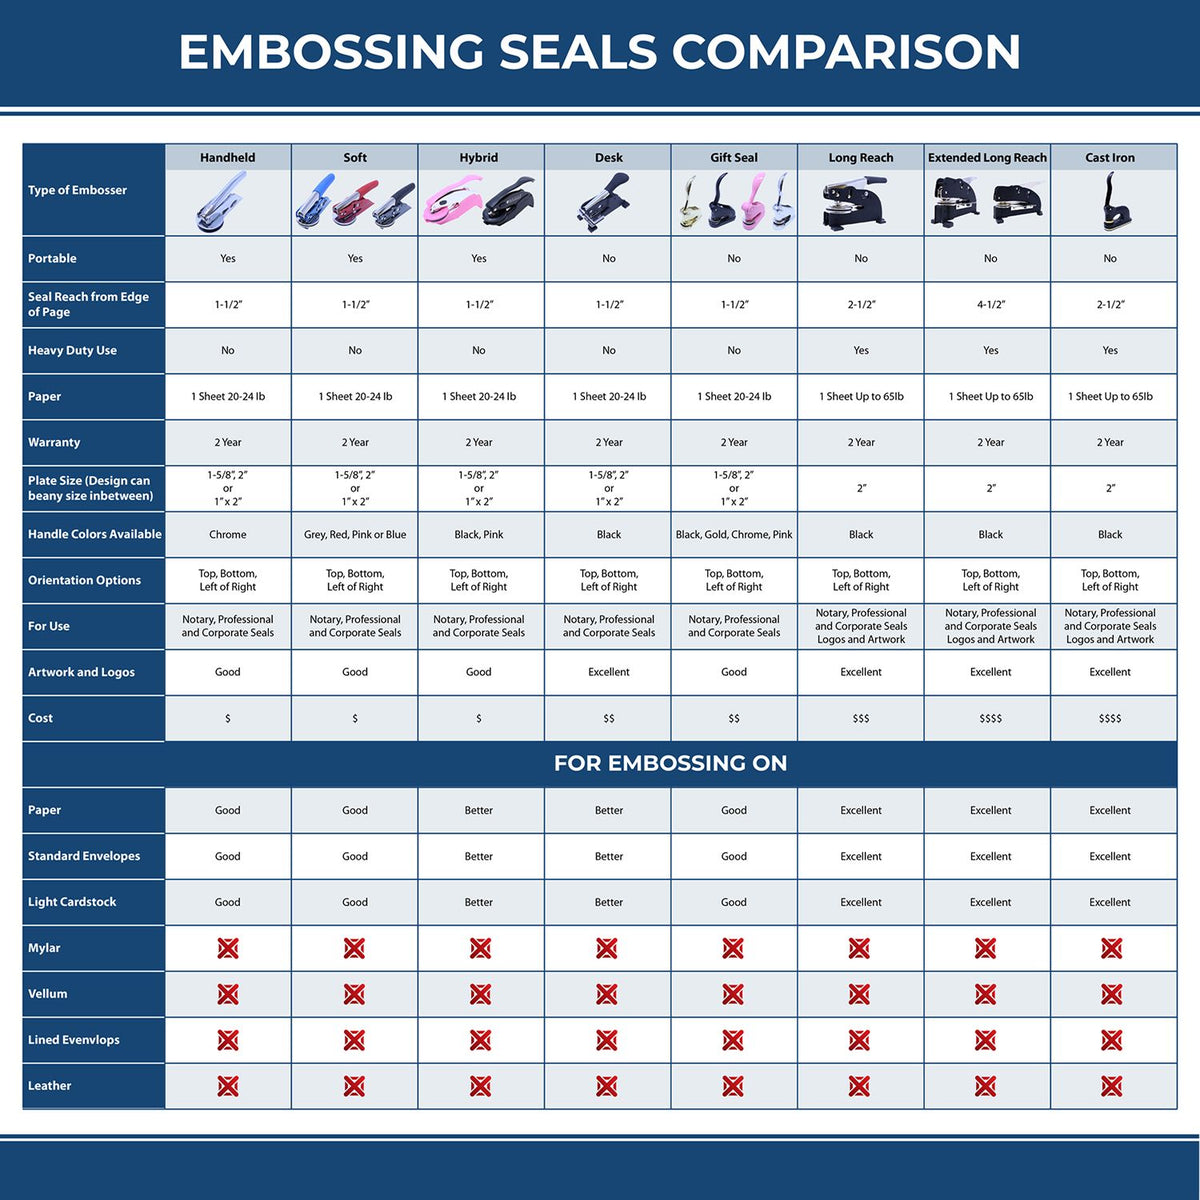 A comparison chart for the different types of mount models available for the Montana Desk Surveyor Seal Embosser.